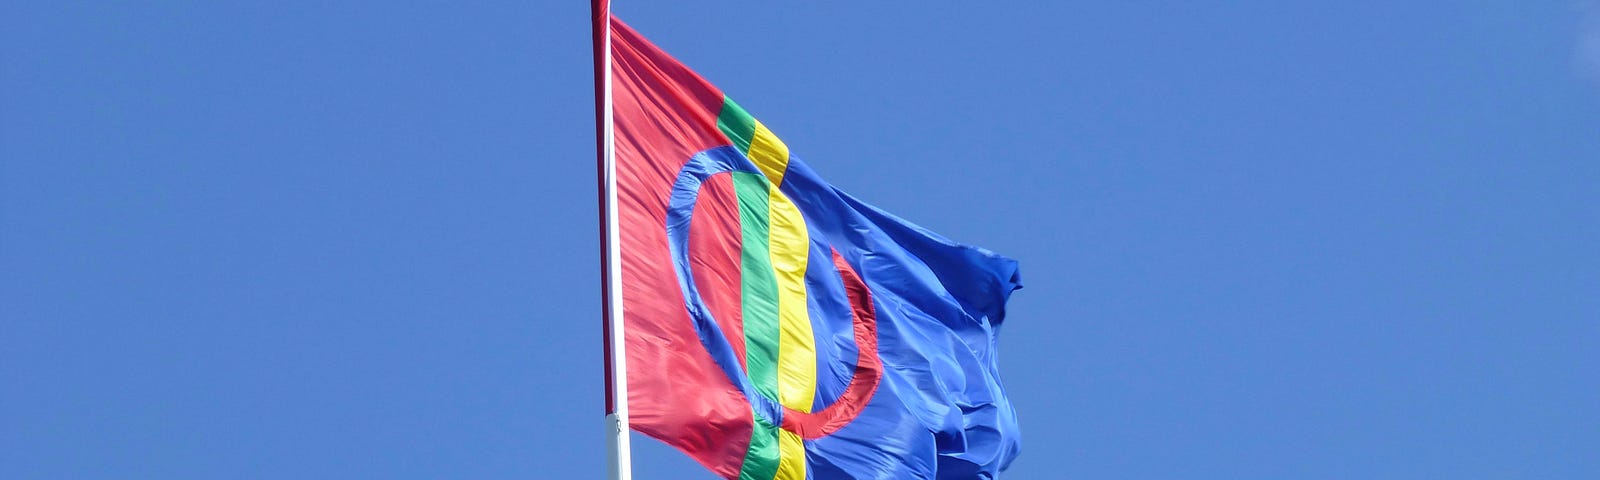 A Saami flag is pictured against a clear blue sky. The flag is red and blue halves separated by vertical sections of green and yellow. Superimposed over the background colors is a circle of blue and red.